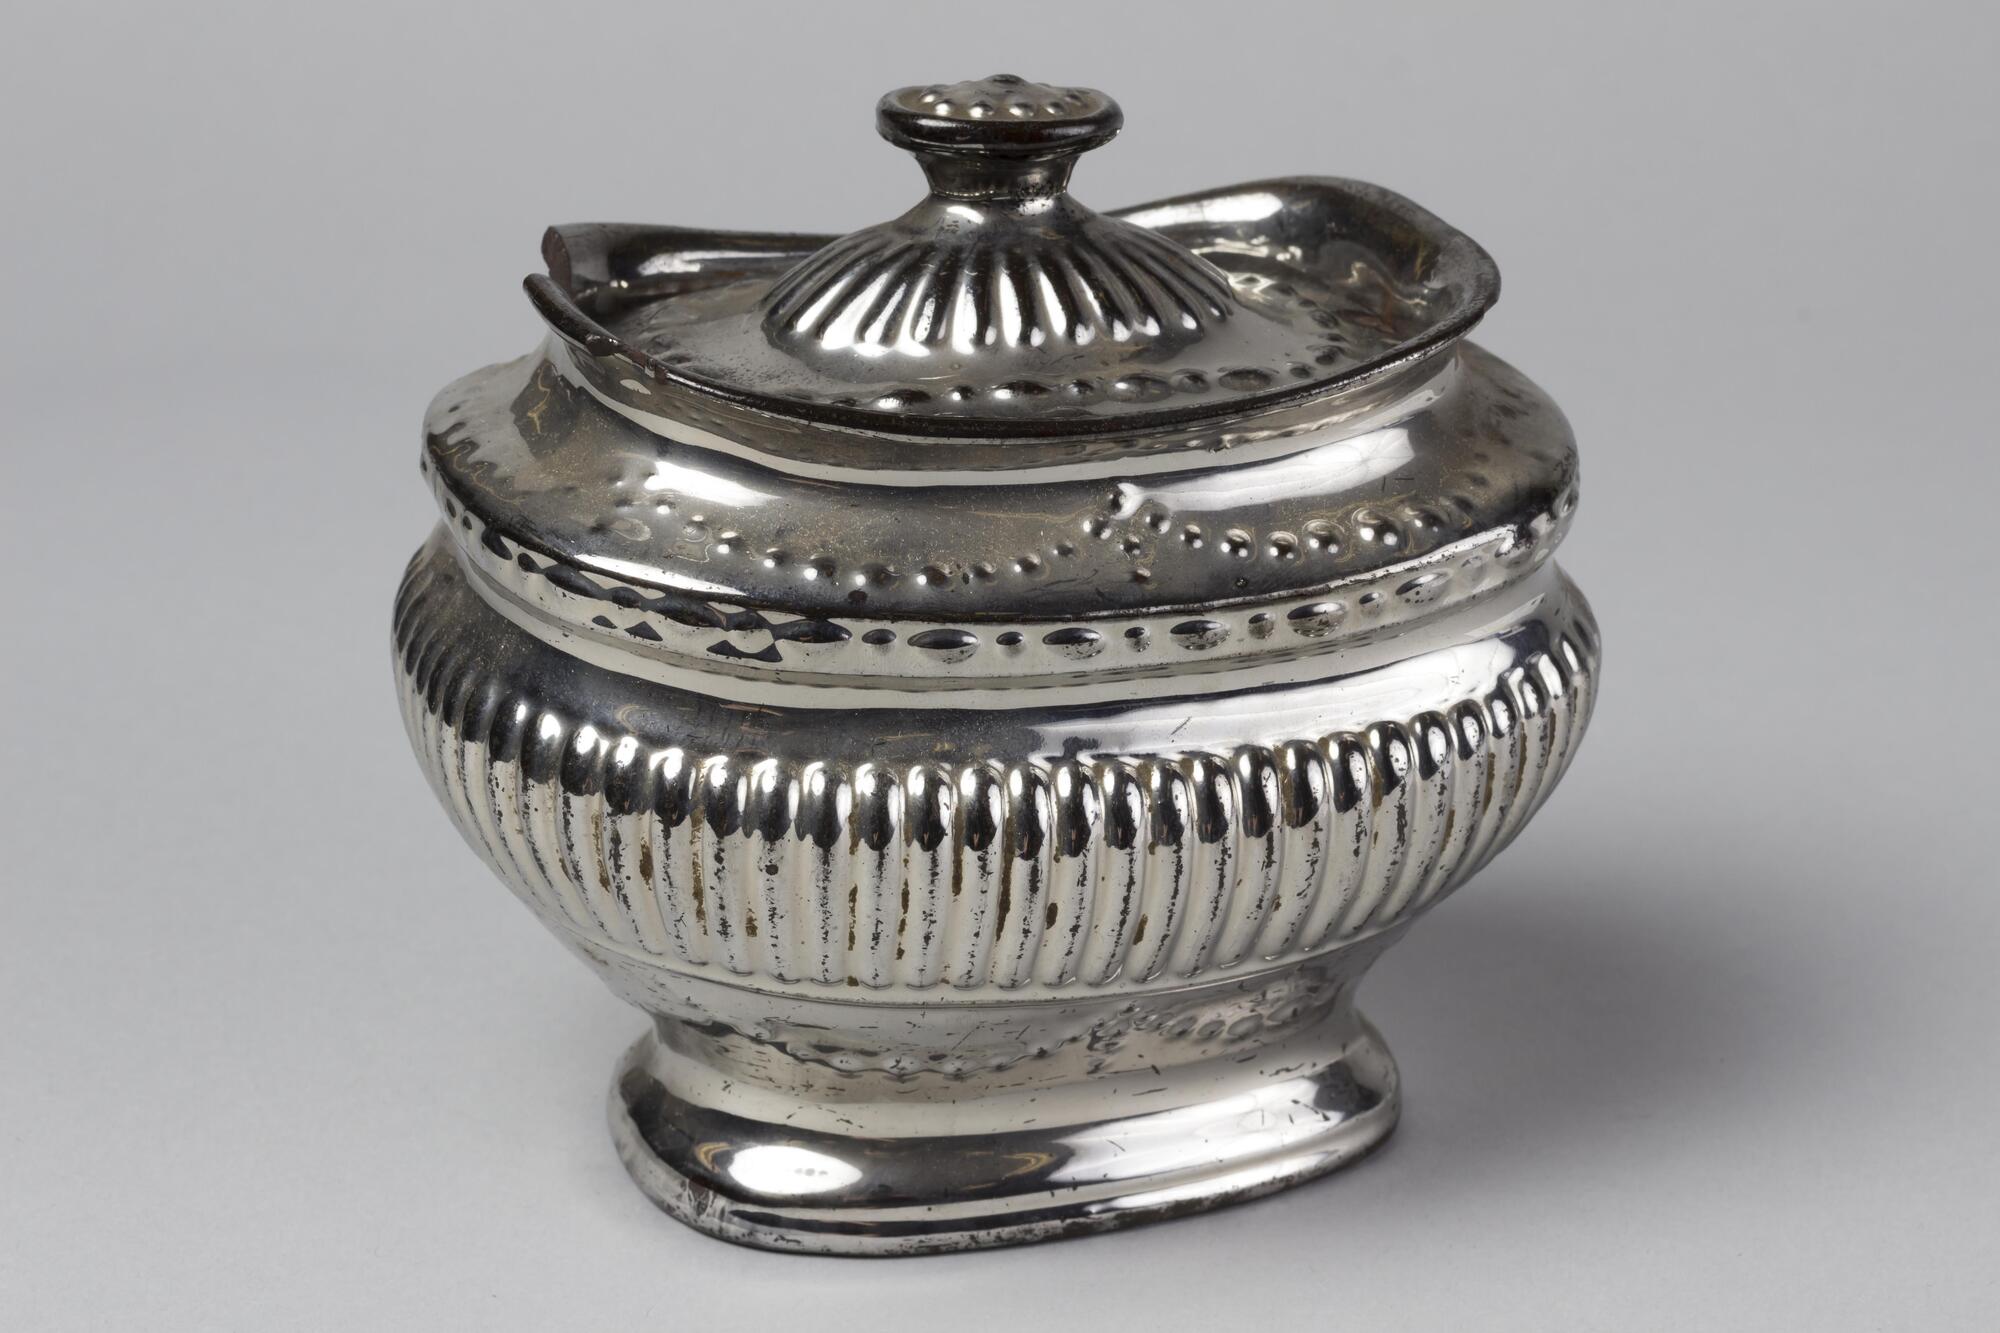 Silver jar with a scalloped dot decoration and vertical lines. The top swoops up on the sides.